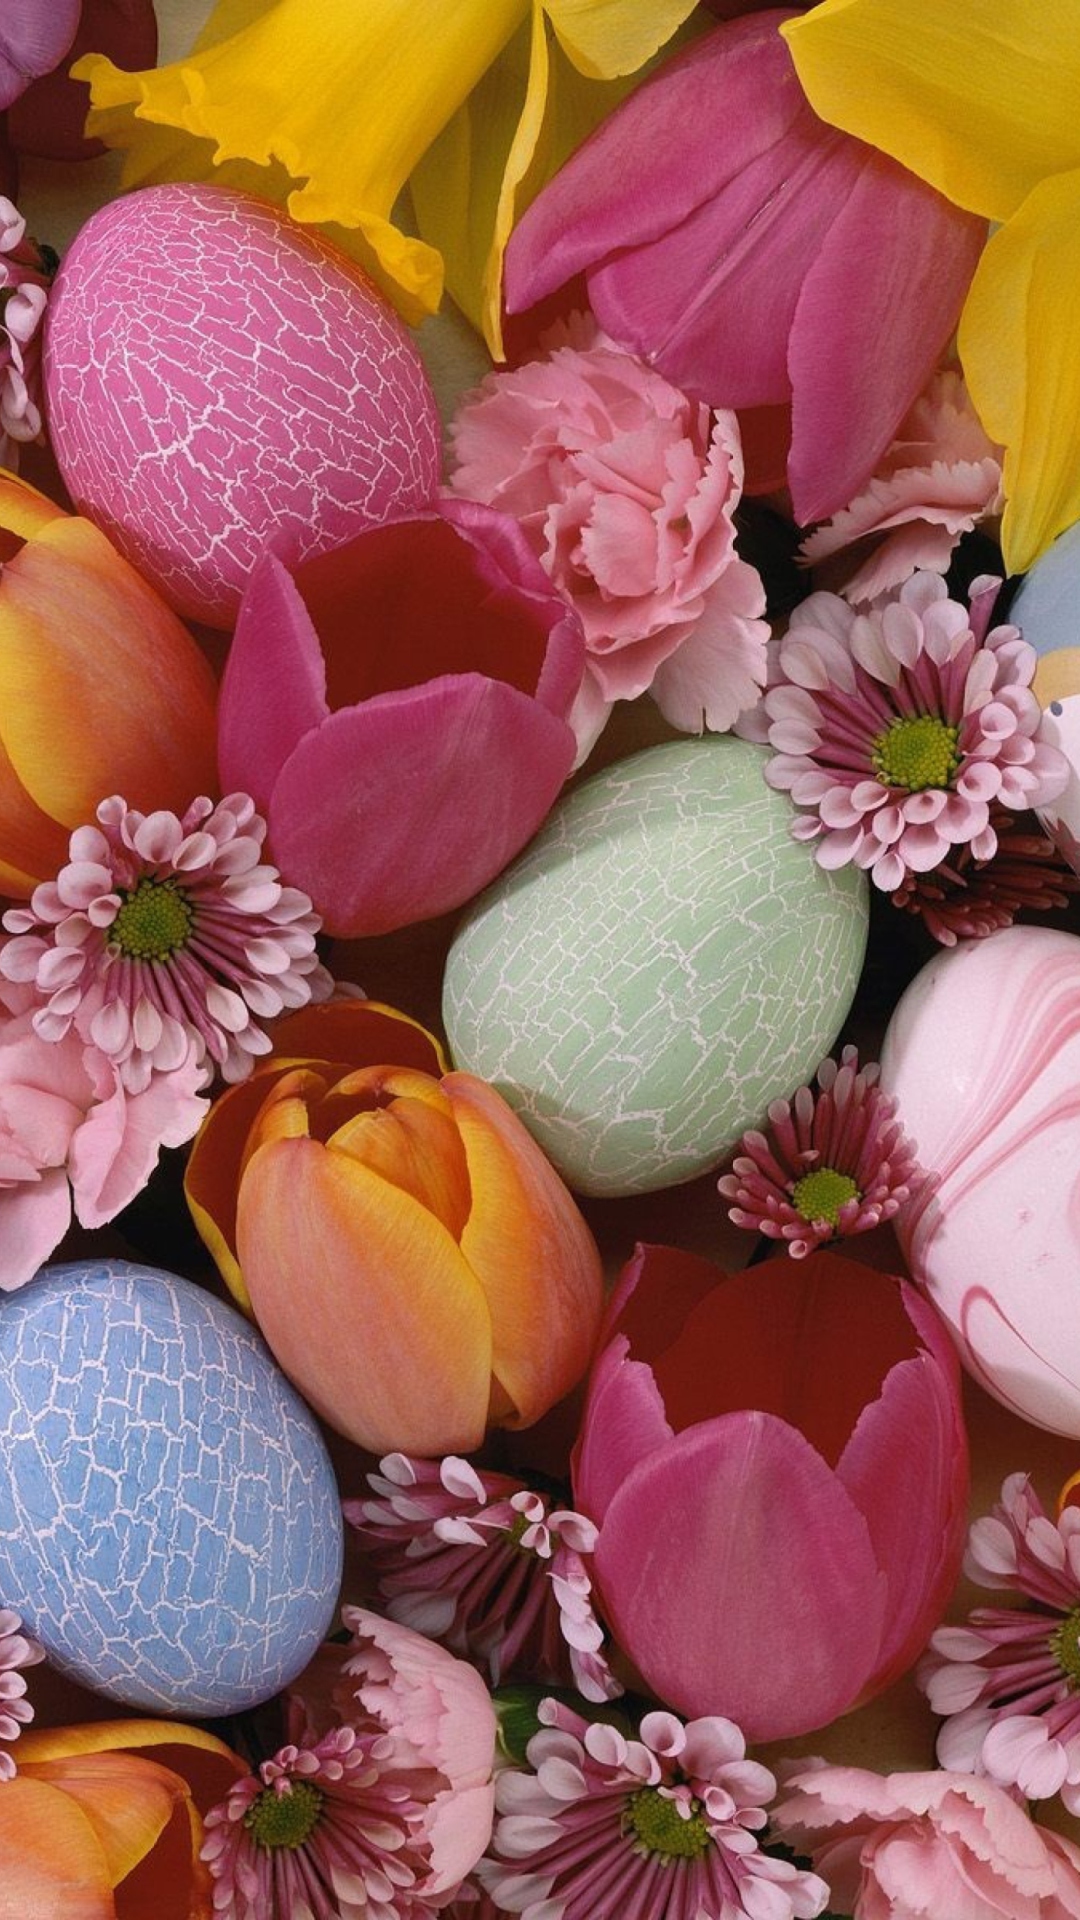 Das Easter Eggs And Flowers Wallpaper 1080x1920